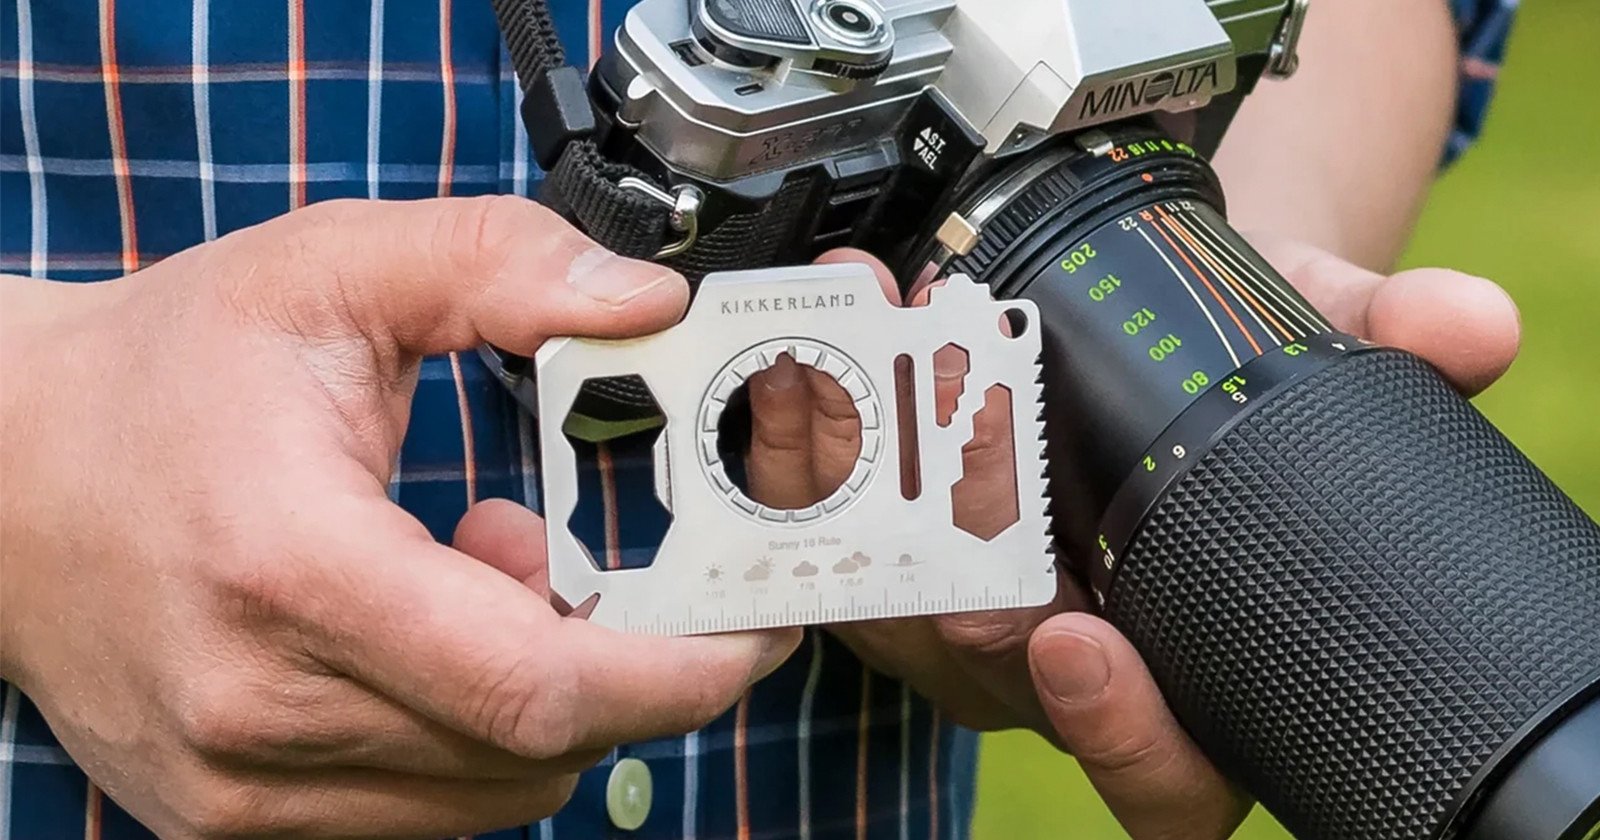 This Camera-Shaped Multi-Tool Squeezes 12 Tools into a Tiny Package